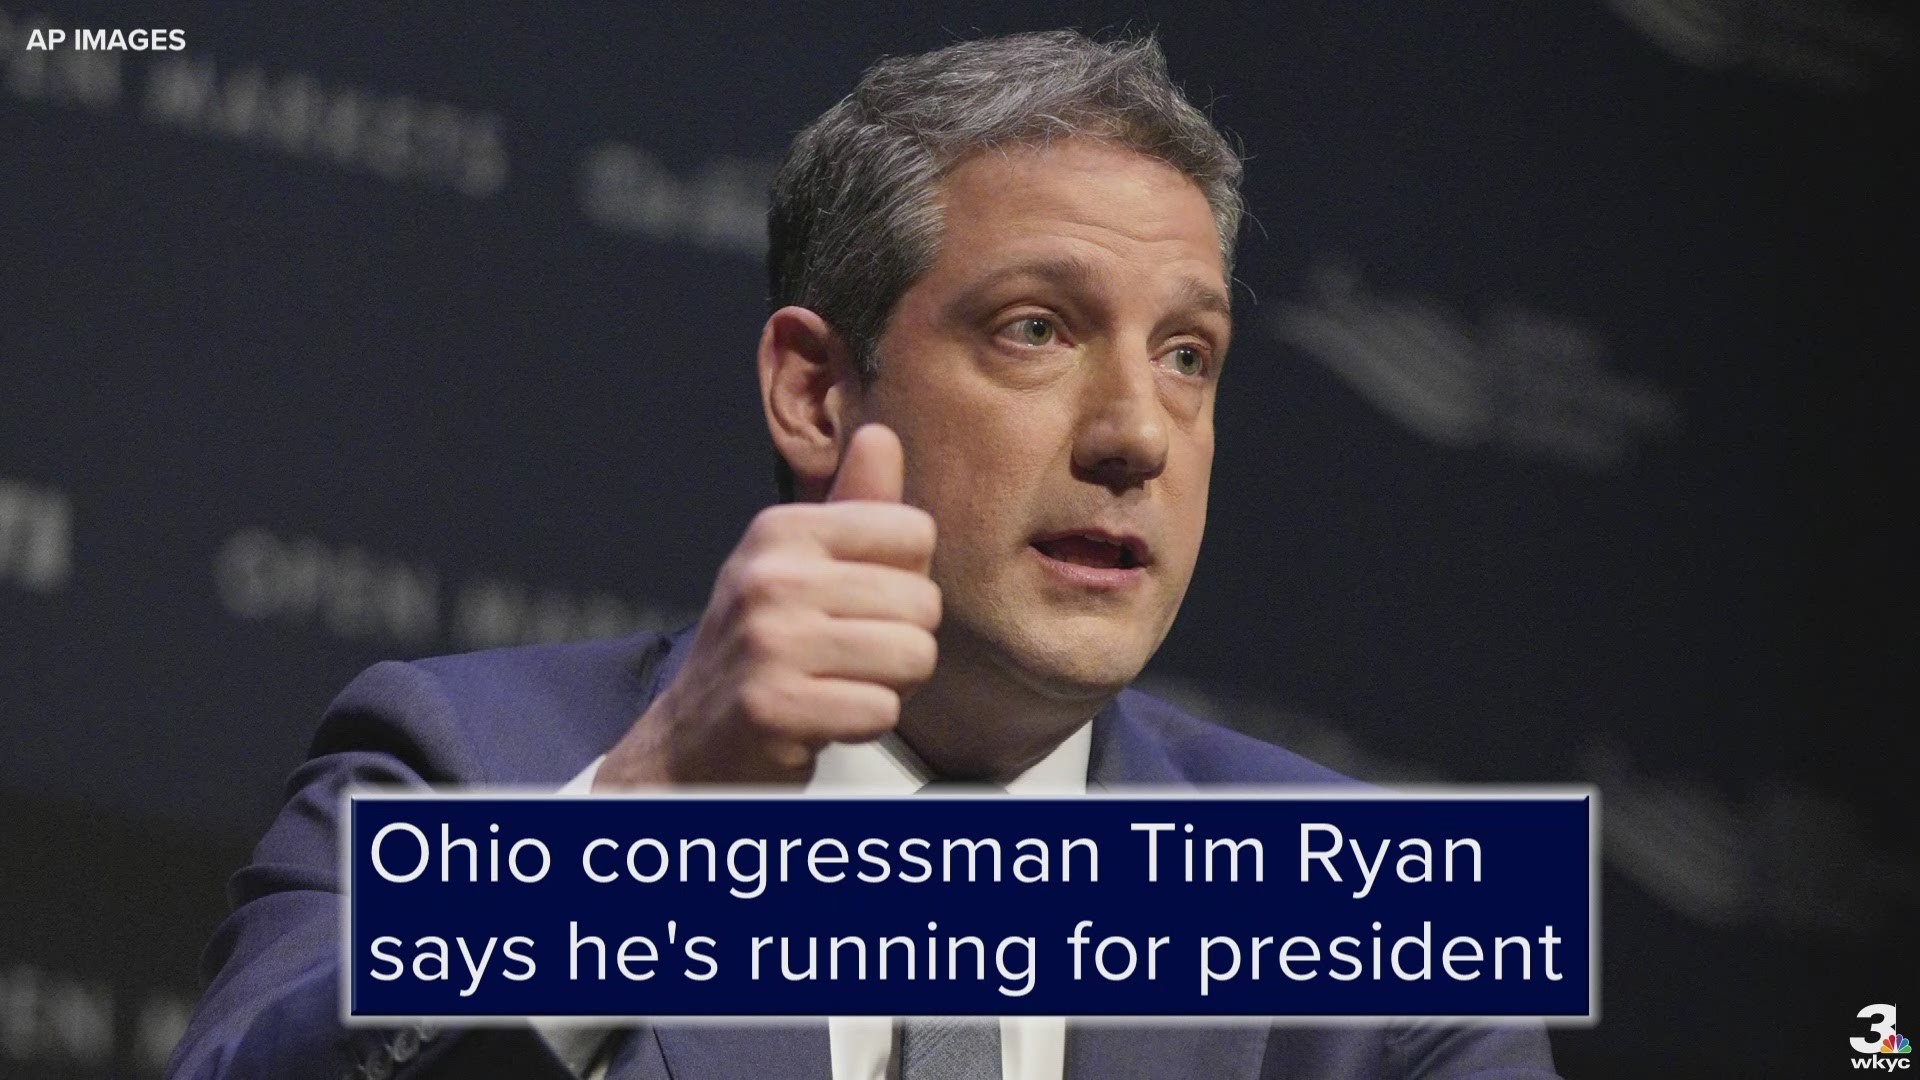 The 45-year-old announced his 2020 Democratic primary bid Thursday.